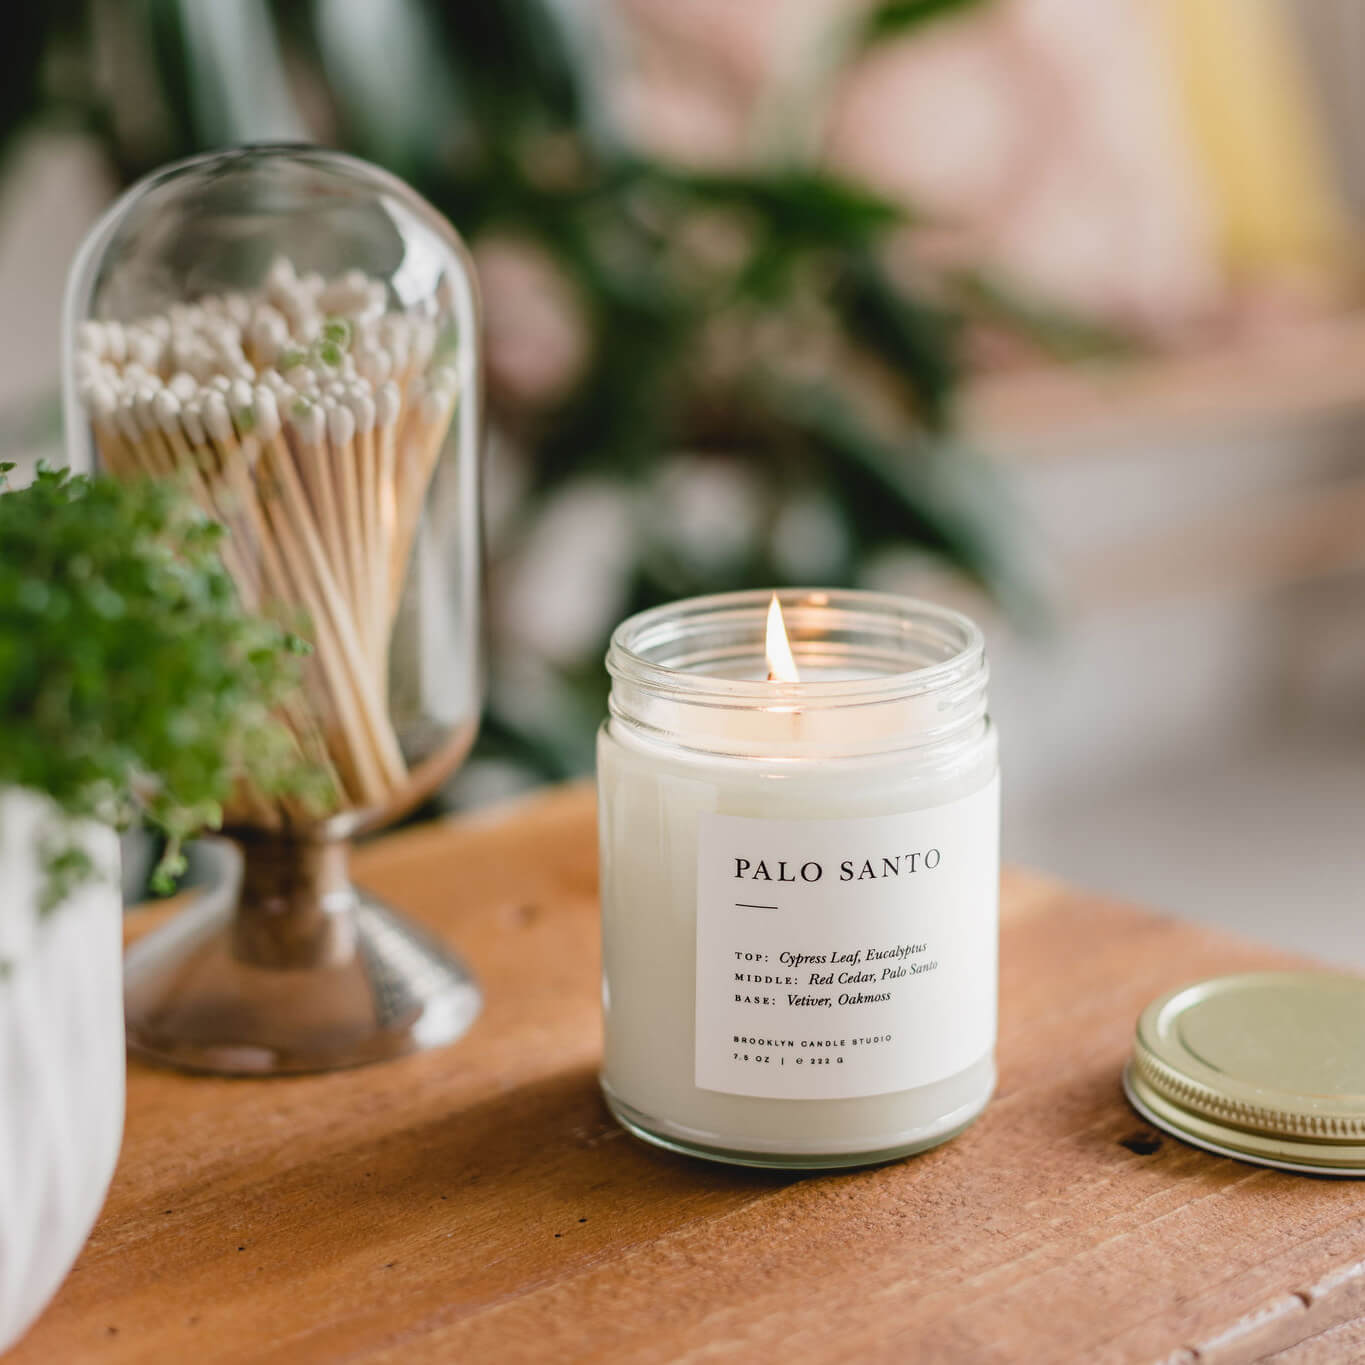 Palo Santo Candle by Brooklyn Candle Studio